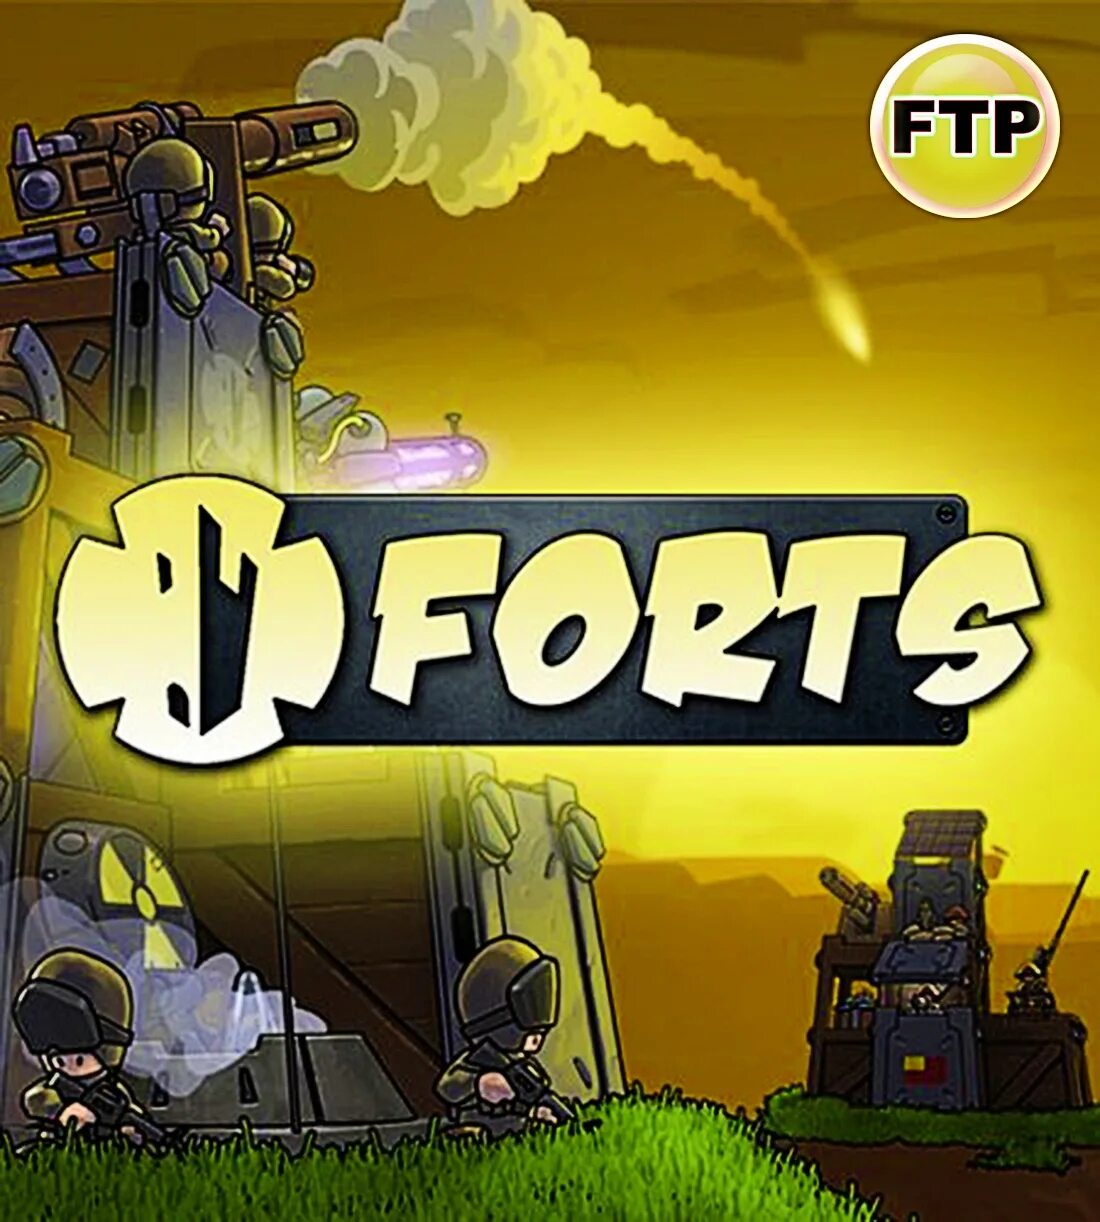 Game fort. Фортс игра. Fortress (игра). Фортс картинки. Forts Steam.